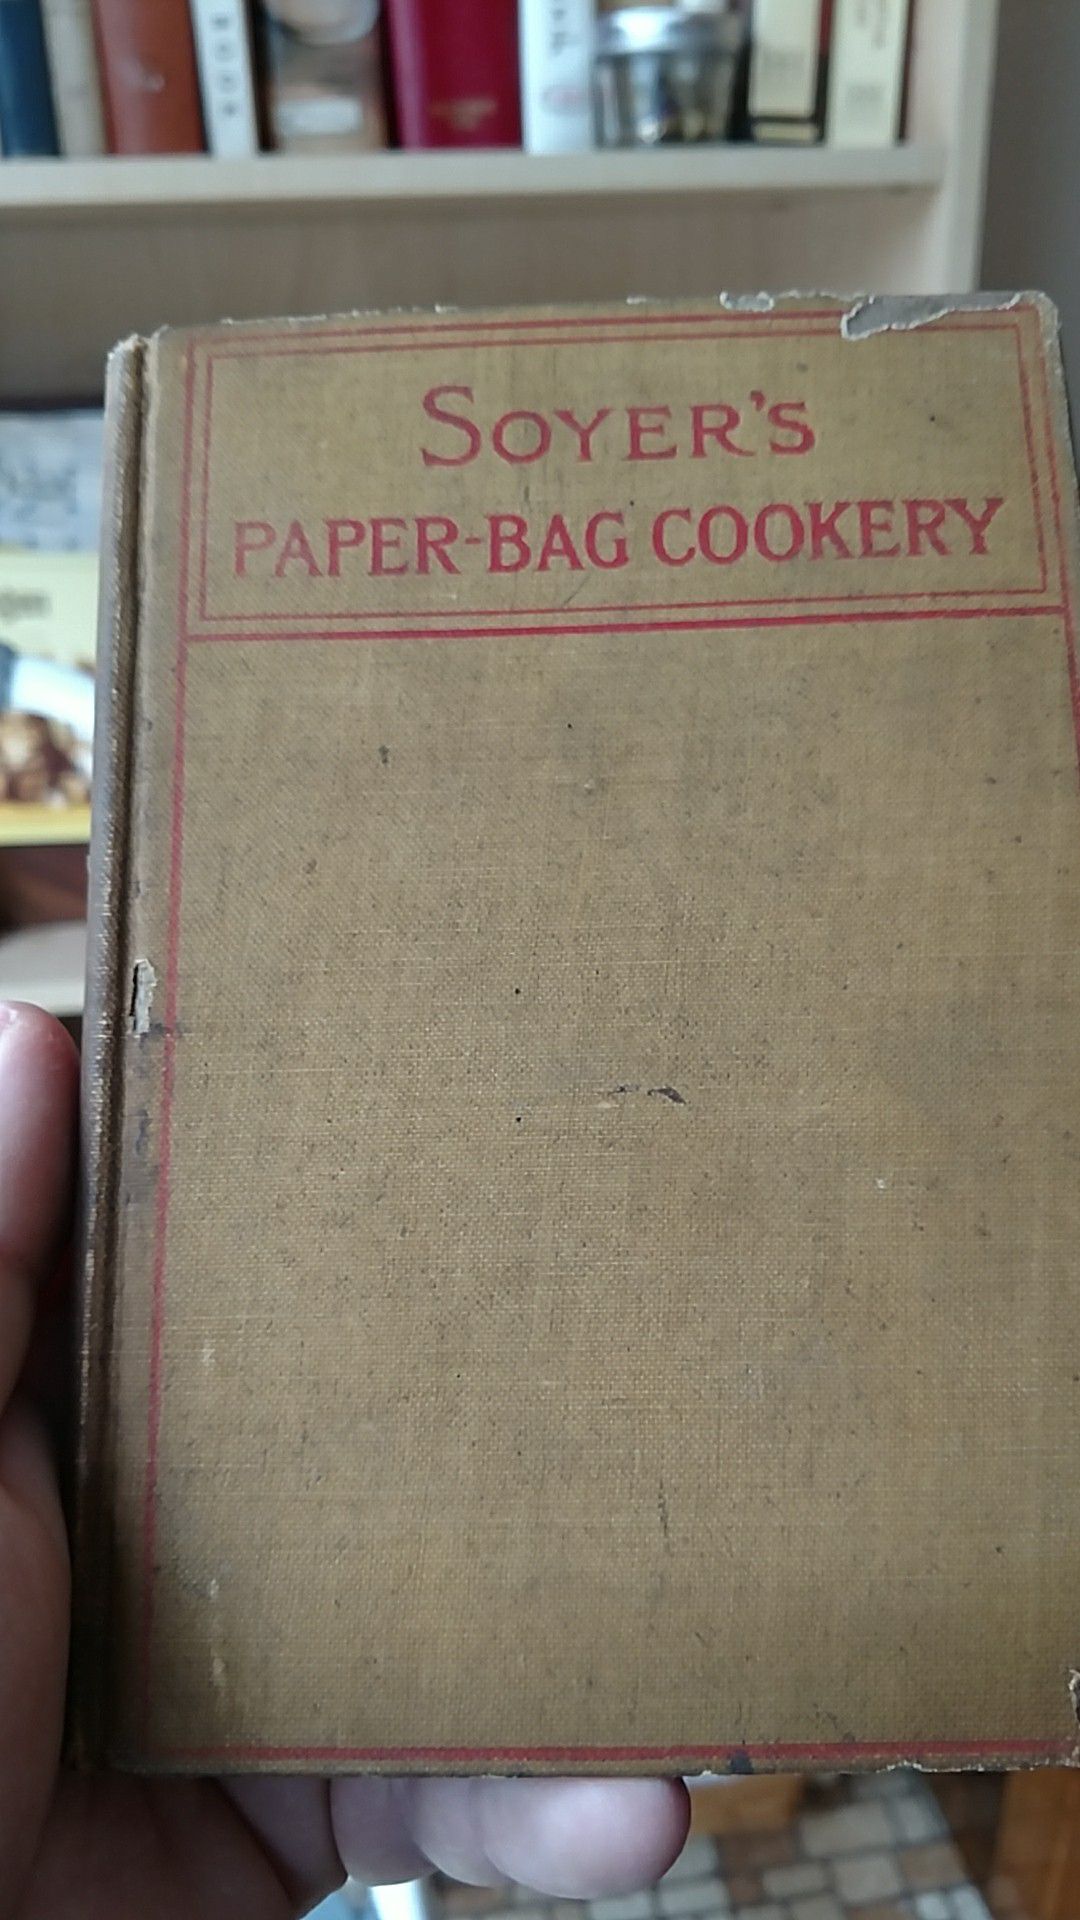 1911 soyers paper-bag cookery